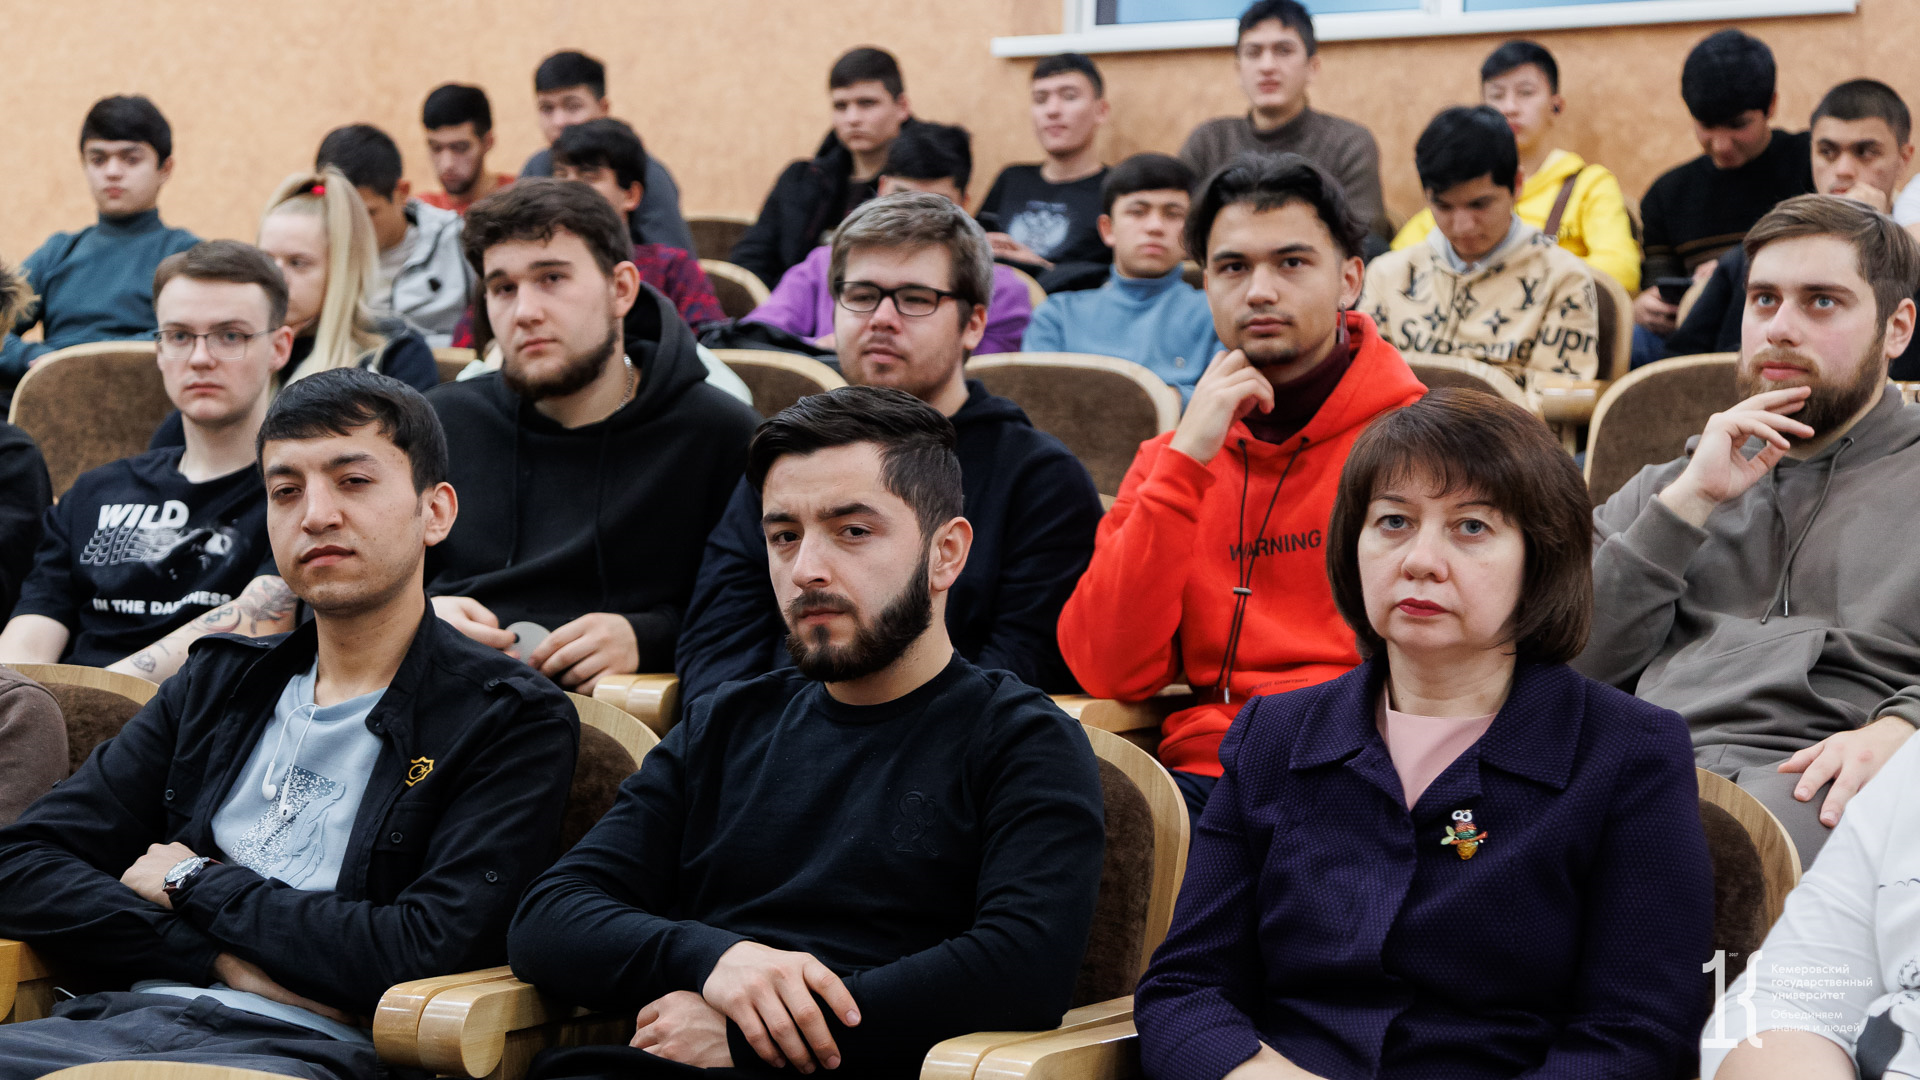 Kemerovo State University hosted an event focused on dialogue between cultures and tolerance